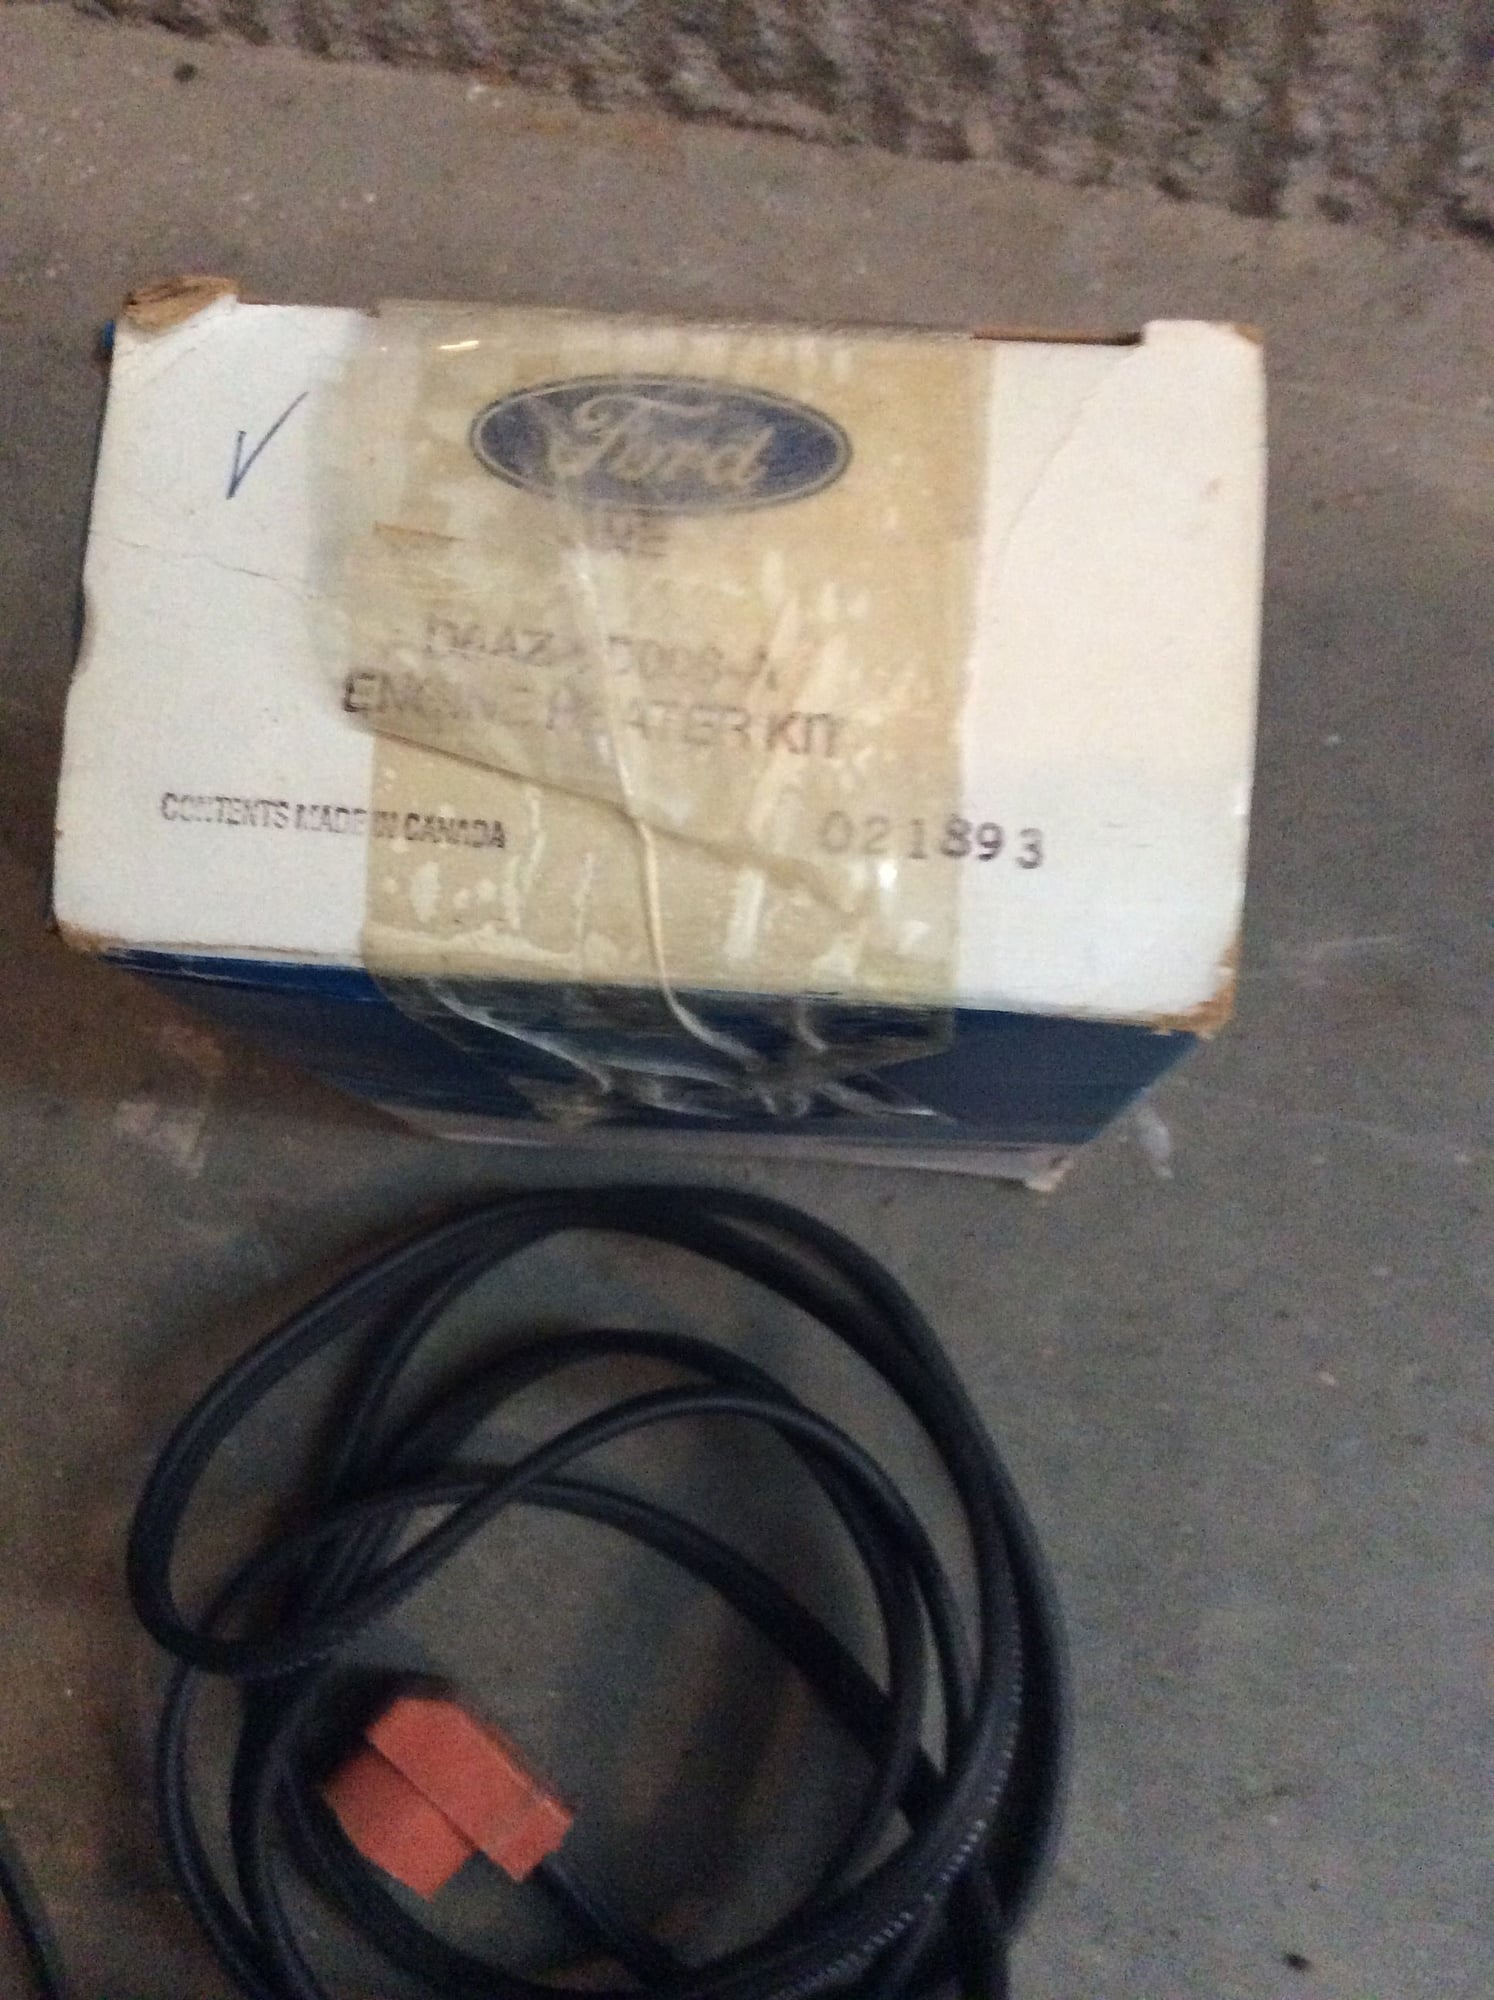 Engine - Electrical - Ford engine block heater - New - 1977 to 1979 Ford F Series - Sioux Falls, SD 57108, United States